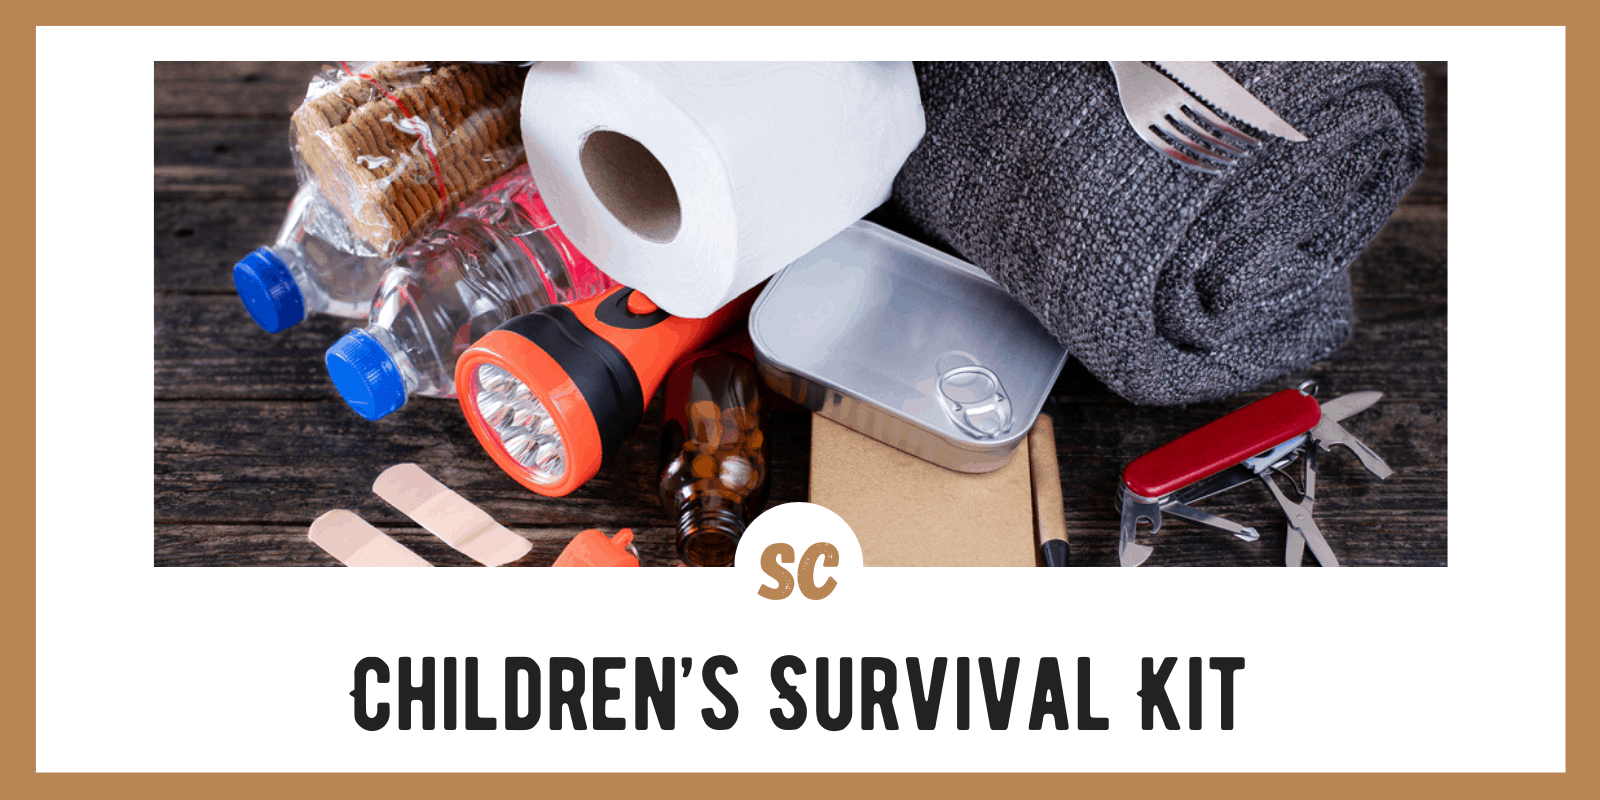 Children’s Survival Kit: 8 Items to Include, Getting Started